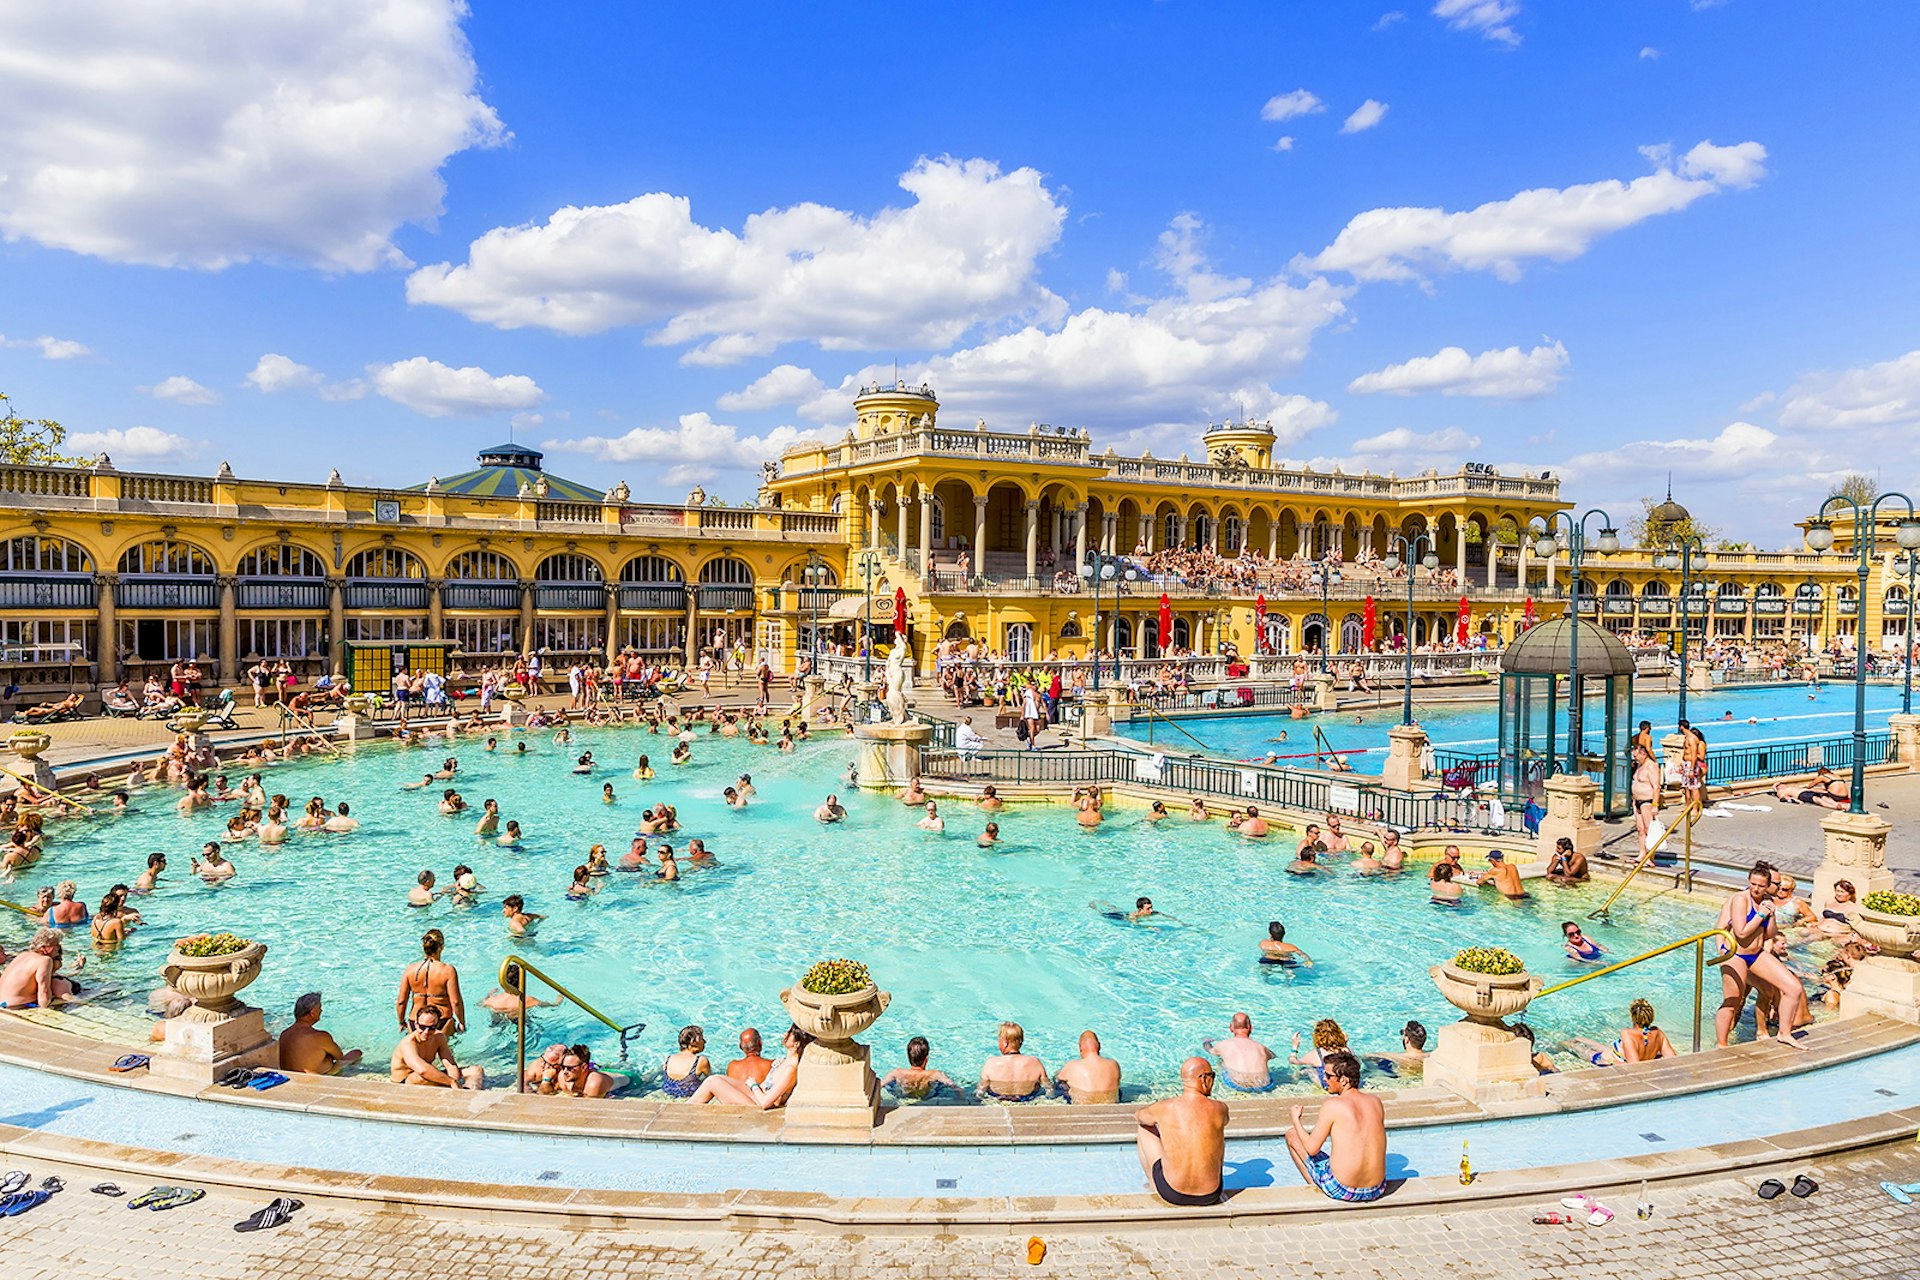 People sit in a semi-circle shaped pool backed by a yellow building with arches on a sunny day in Budapest, Hungary